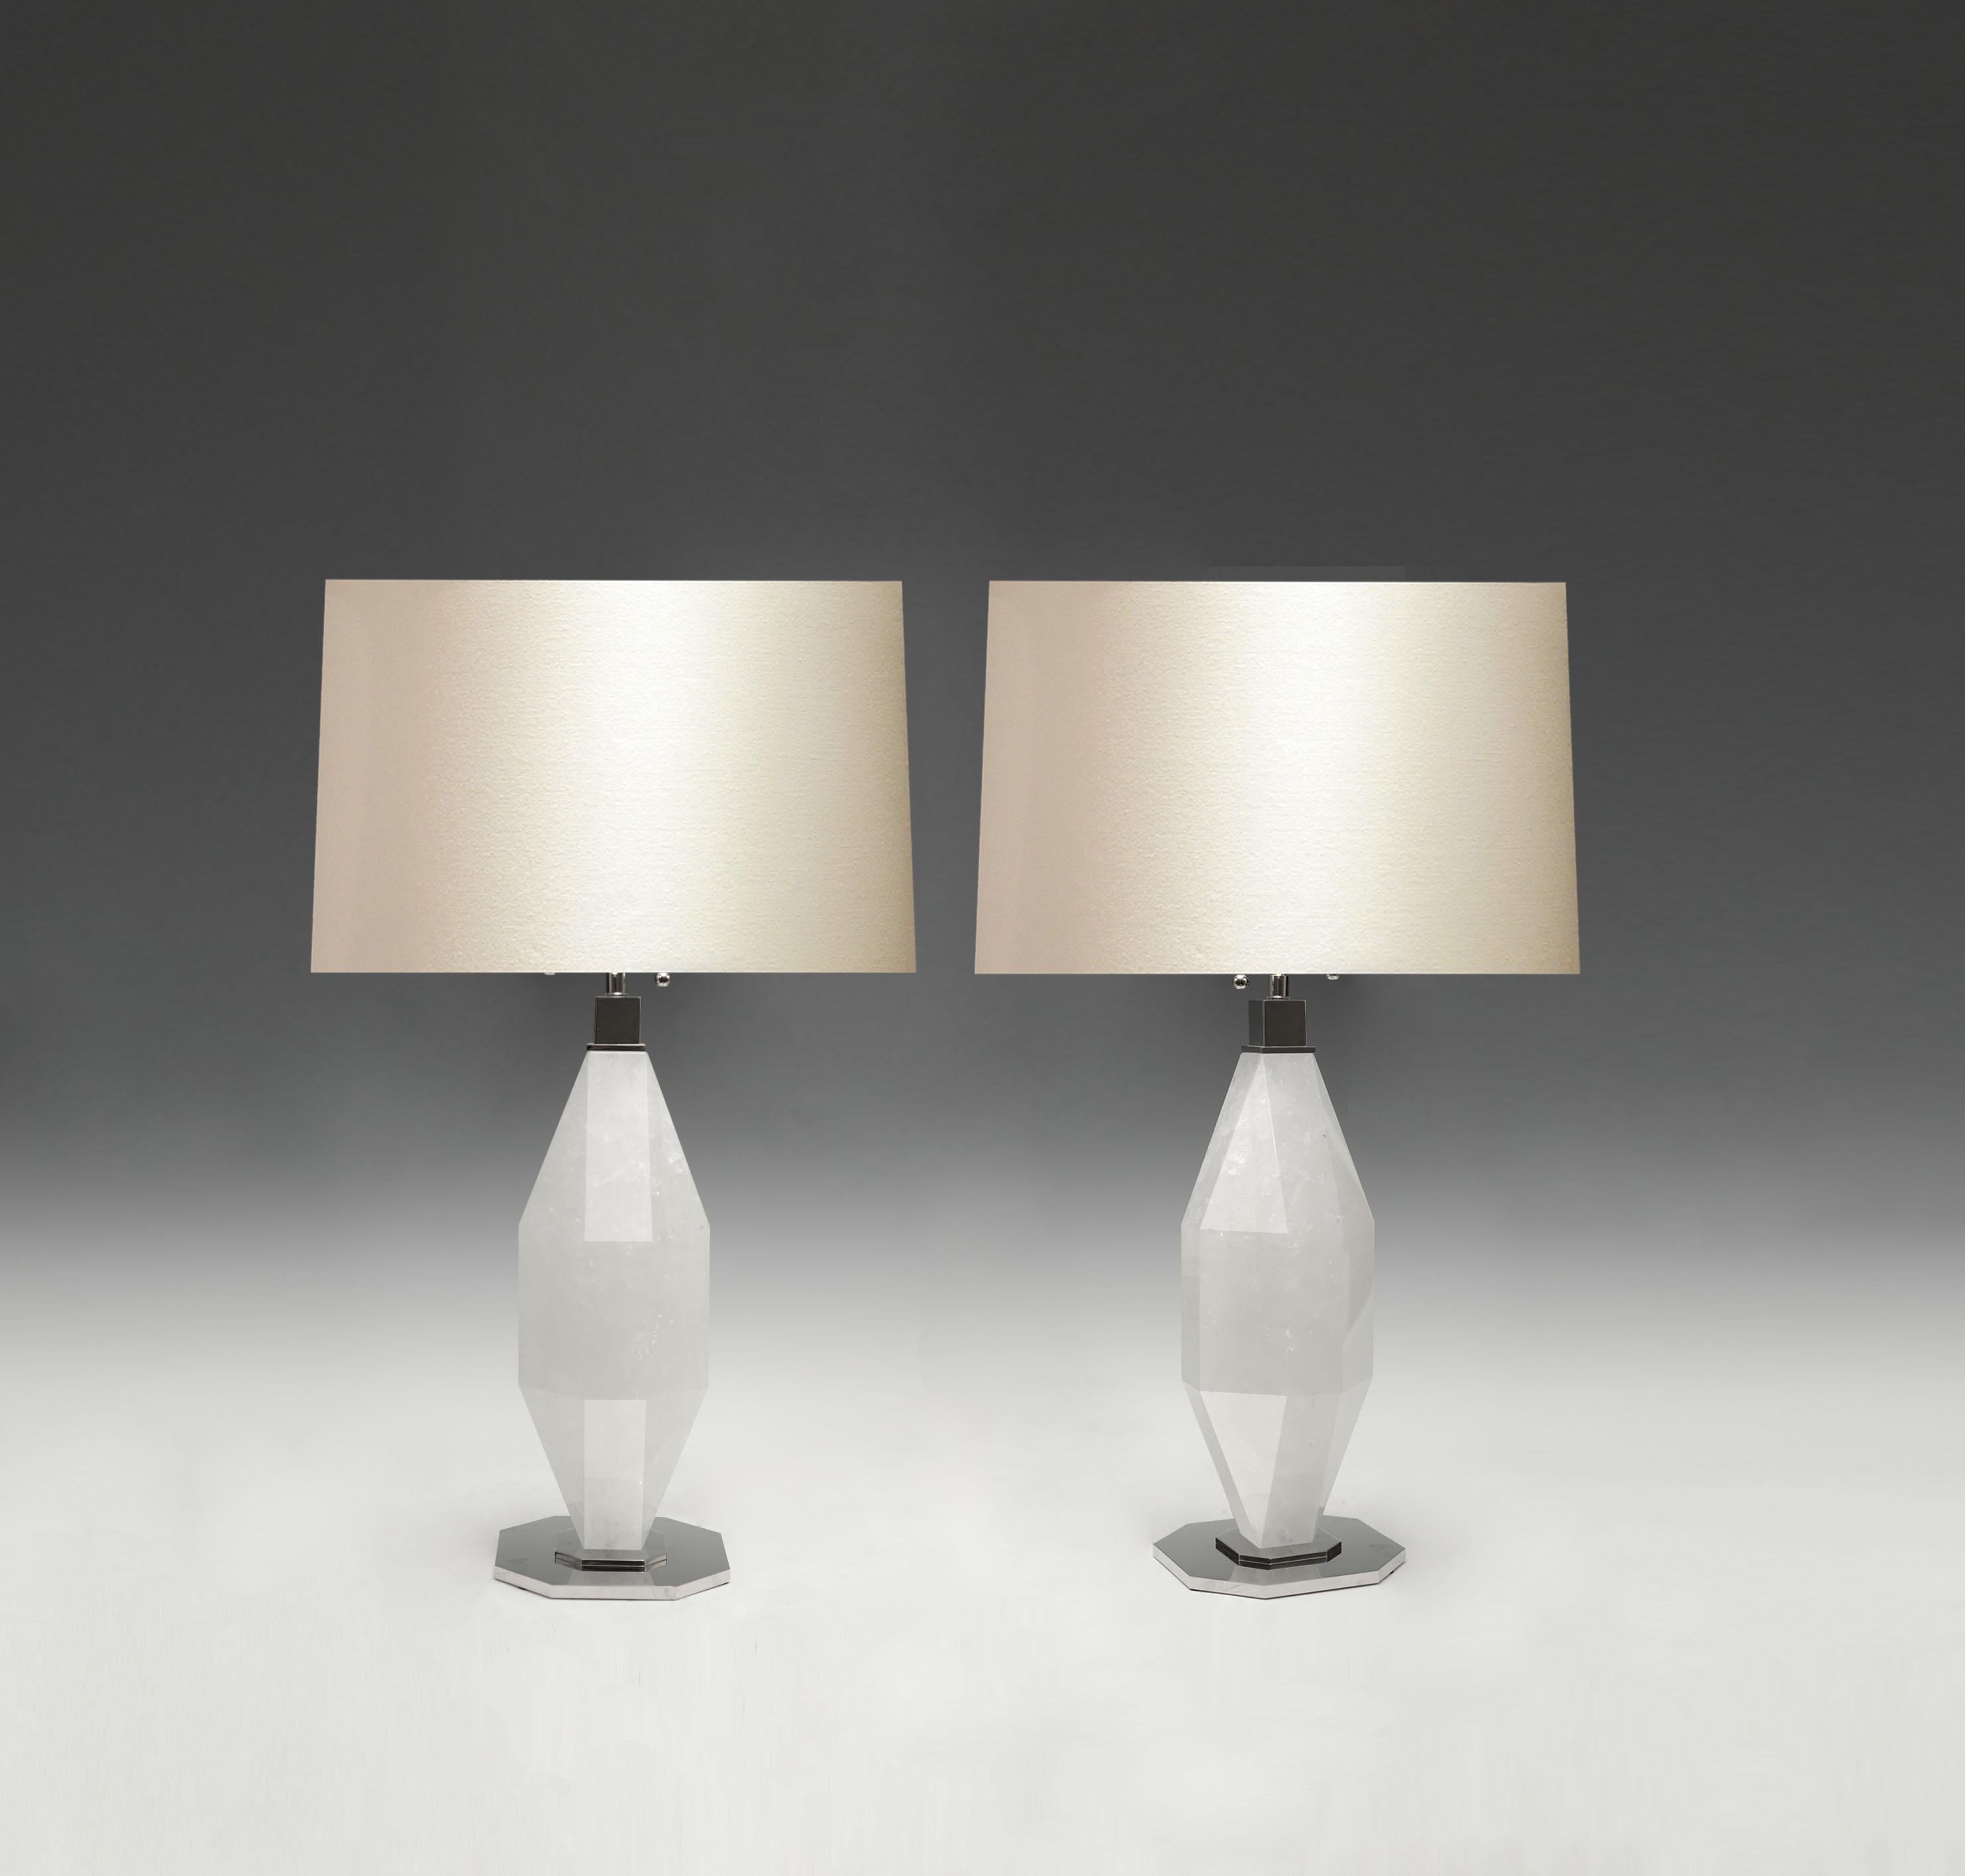 Pair of diamond rock crystal lamps with nickel plating bases. Created by Phoenix Gallery, NYC. 
Each lamp installs two sockets.
Lampshade do not include.
To the top of the rock crystal 18 in / H.